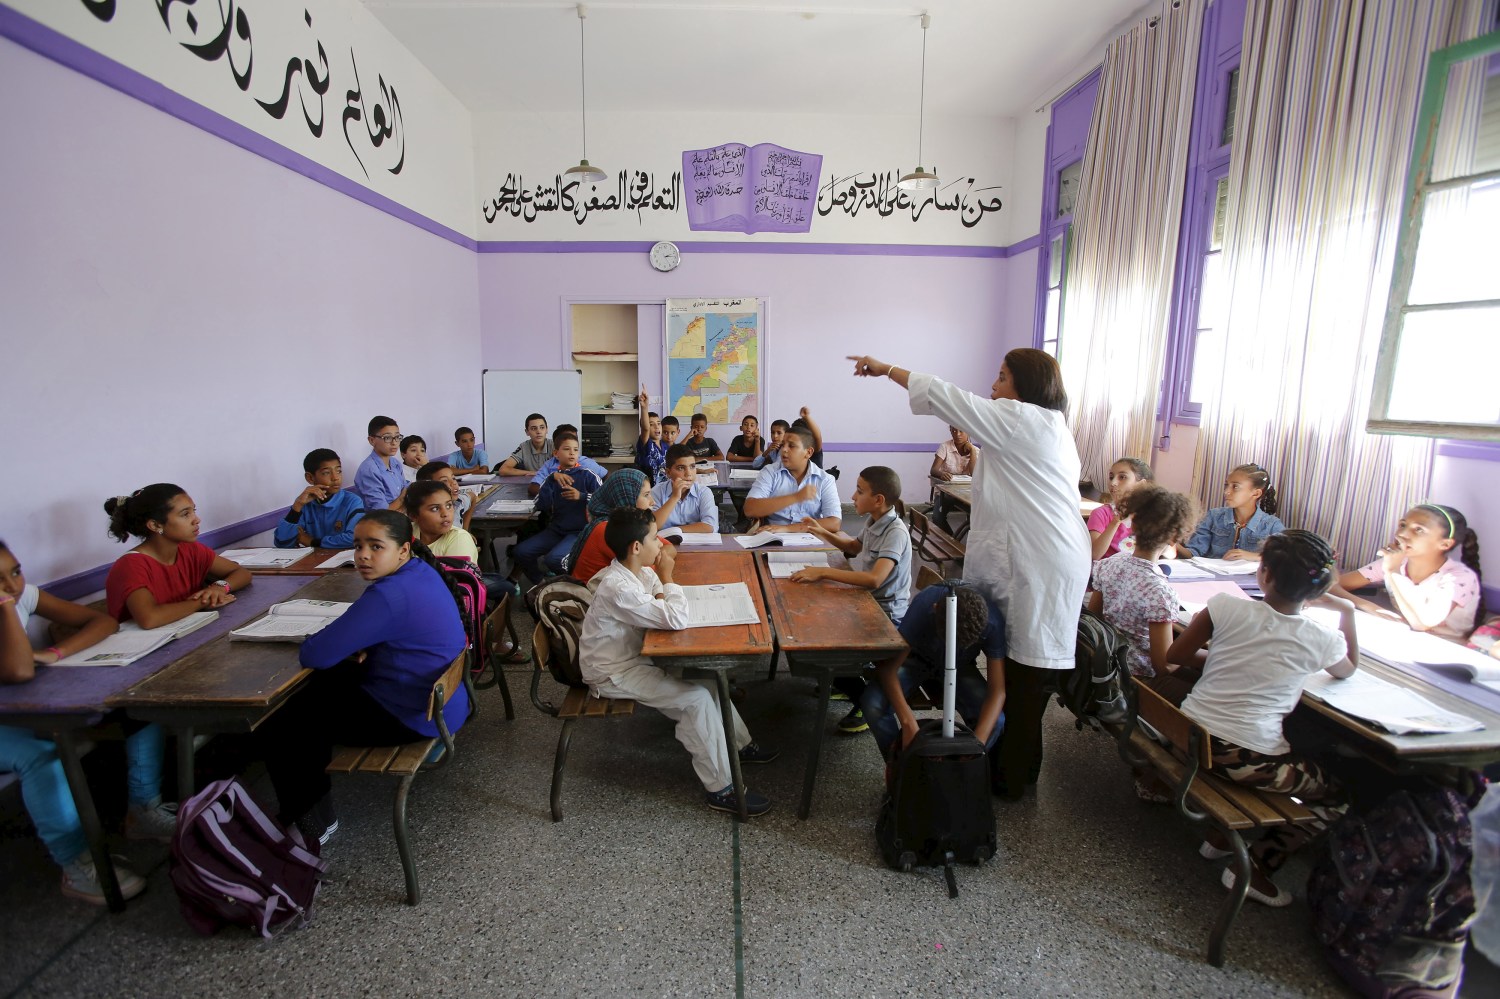 Schoolchildren listen to a teacher as they study during a class in the Oudaya primary school in Rabat, September 15, 2015, at the start of the new school year in Morocco. Nearly three years after Taliban gunmen shot Pakistani schoolgirl Malala Yousafzai, the teenage activist last week urged world leaders gathered in New York to help millions more children go to school. World Teachers' Day falls on 5 October, a Unesco initiative highlighting the work of educators struggling to teach children amid intimidation in Pakistan, conflict in Syria or poverty in Vietnam. Even so, there have been some improvements: the number of children not attending primary school has plummeted to an estimated 57 million worldwide in 2015, the U.N. says, down from 100 million 15 years ago. Reuters photographers have documented learning around the world, from well-resourced schools to pupils crammed into corridors in the Philippines, on boats in Brazil or in crowded classrooms in Burundi.  REUTERS/Youssef BoudlalPICTURE 40 OF 47 FOR WIDER IMAGE STORY "SCHOOLS AROUND THE WORLD"SEARCH "EDUCATORS SCHOOLS" FOR ALL IMAGES - GF10000226473